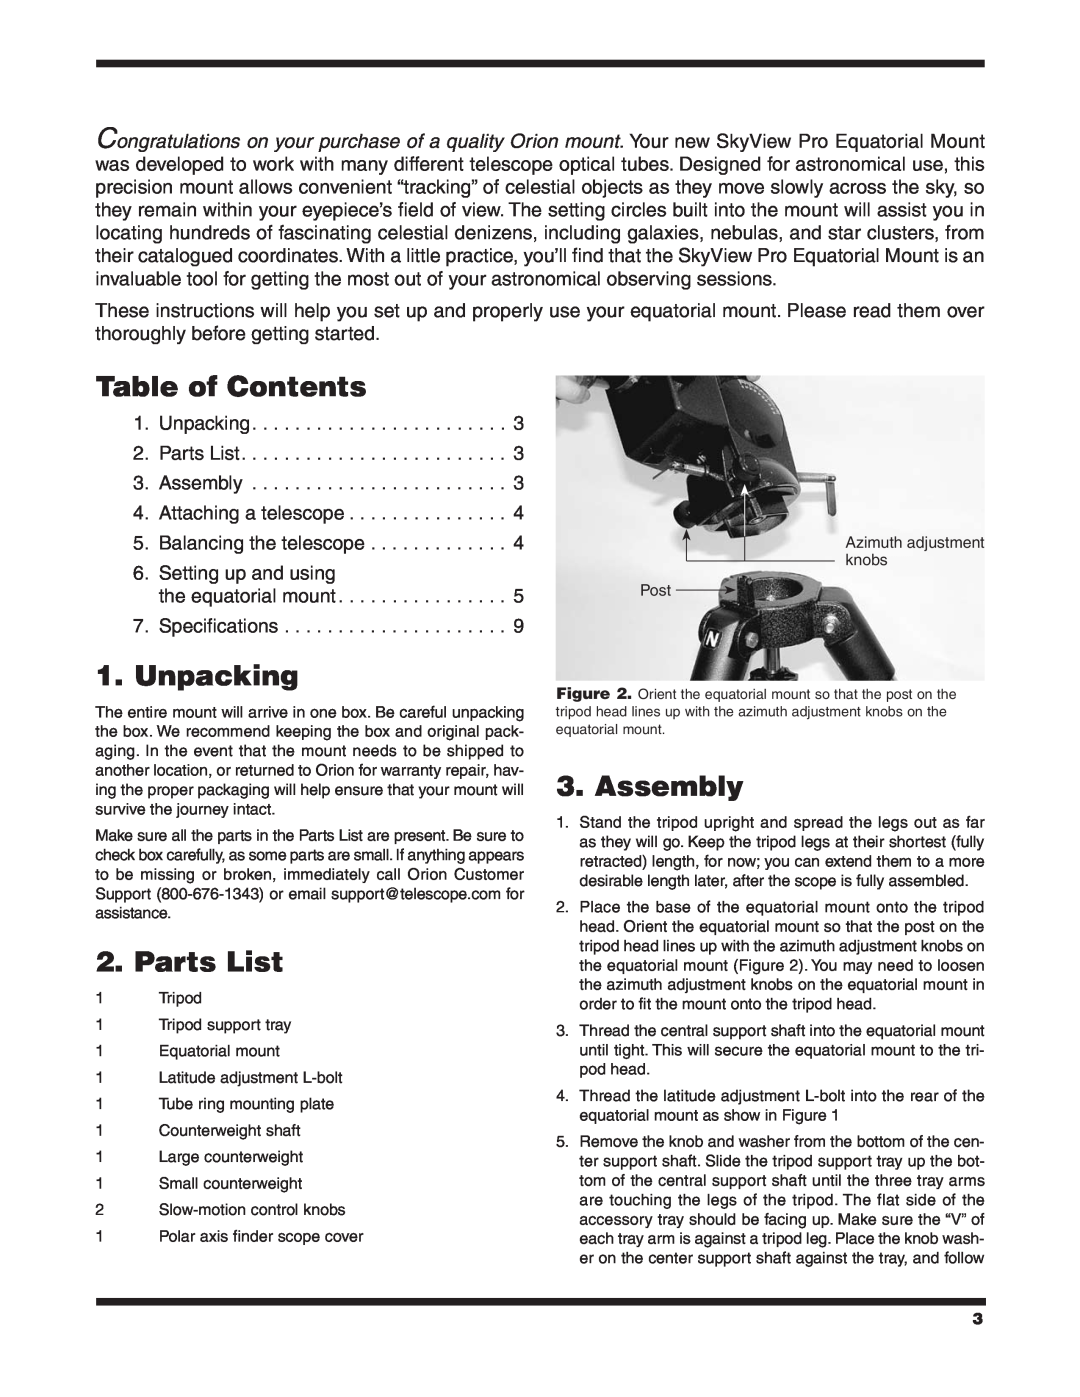 Orion 9829 Table of Contents, Unpacking, Parts List, Assembly, Balancing the telescope 6. Setting up and using 